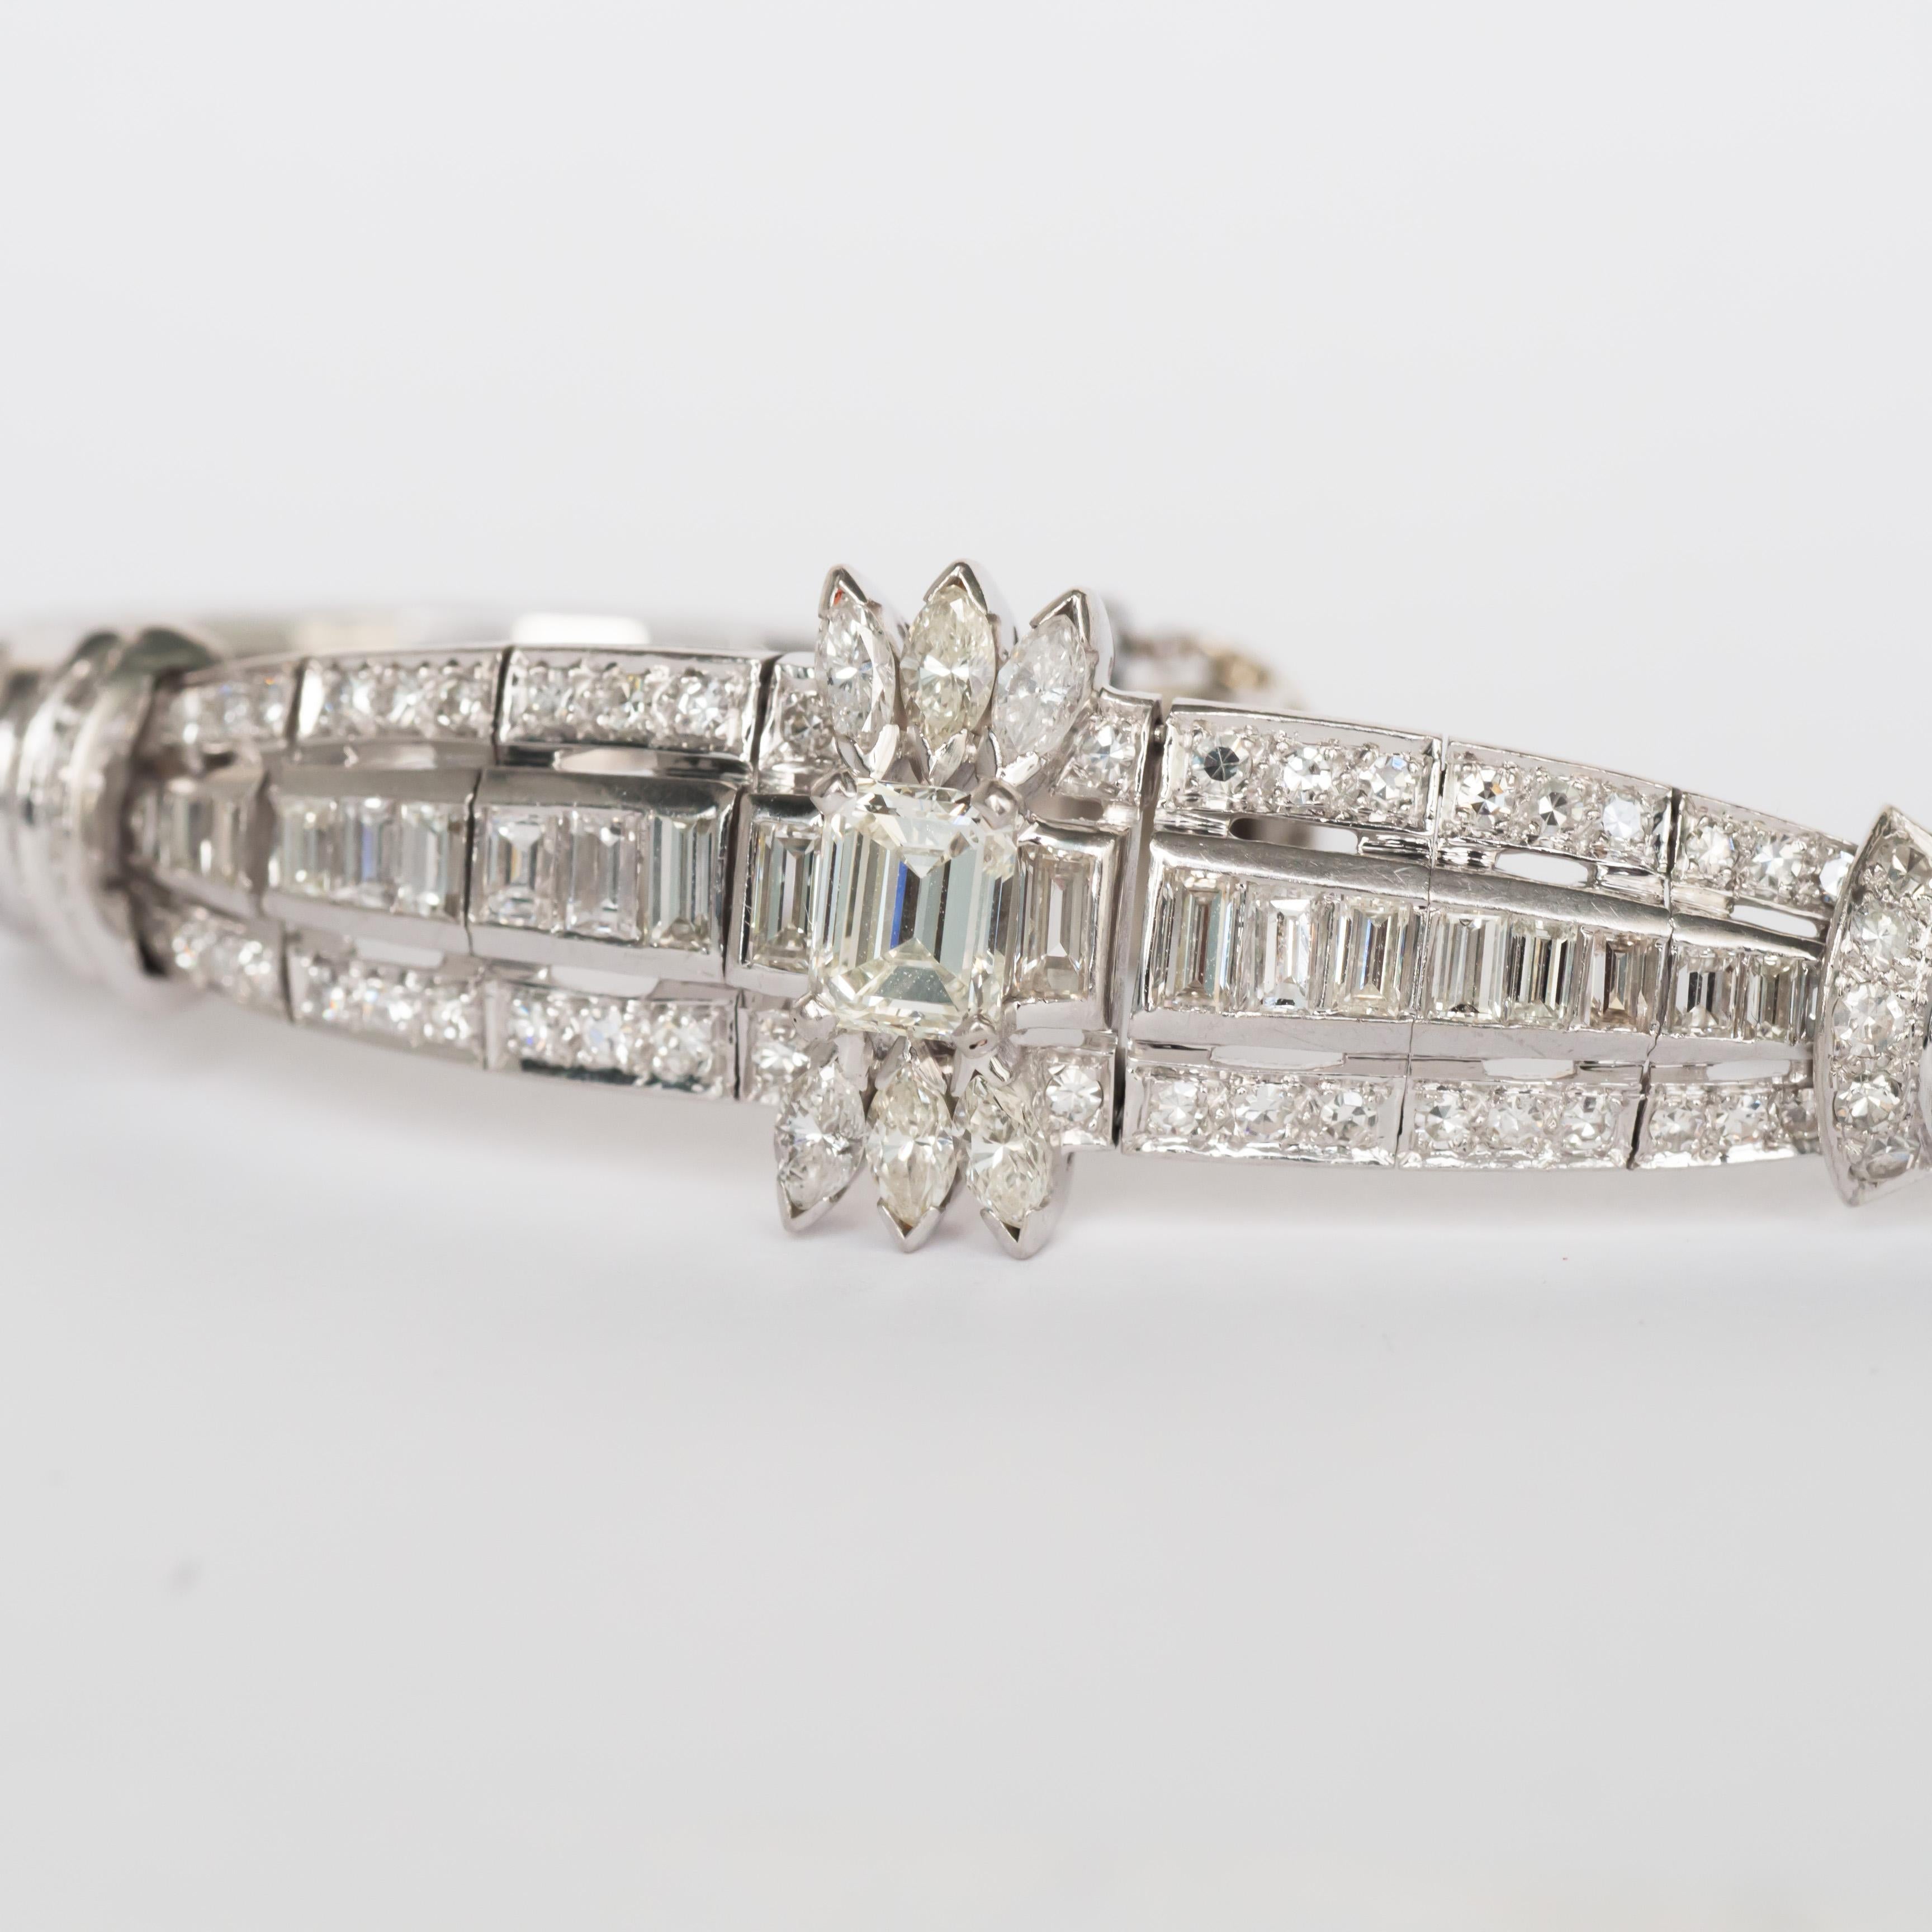 Metal Type: Platinum  [Hallmarked, and Tested]
Weight: 32.5 grams

Center Diamond Details:
Weight: 1.00 carat
Cut: Vintage Emerald Cut
Color: J  
Clarity: VS1

Side Diamond Details:
Weight: 6.00 carat, total weight
Cut: Antique Baguette,